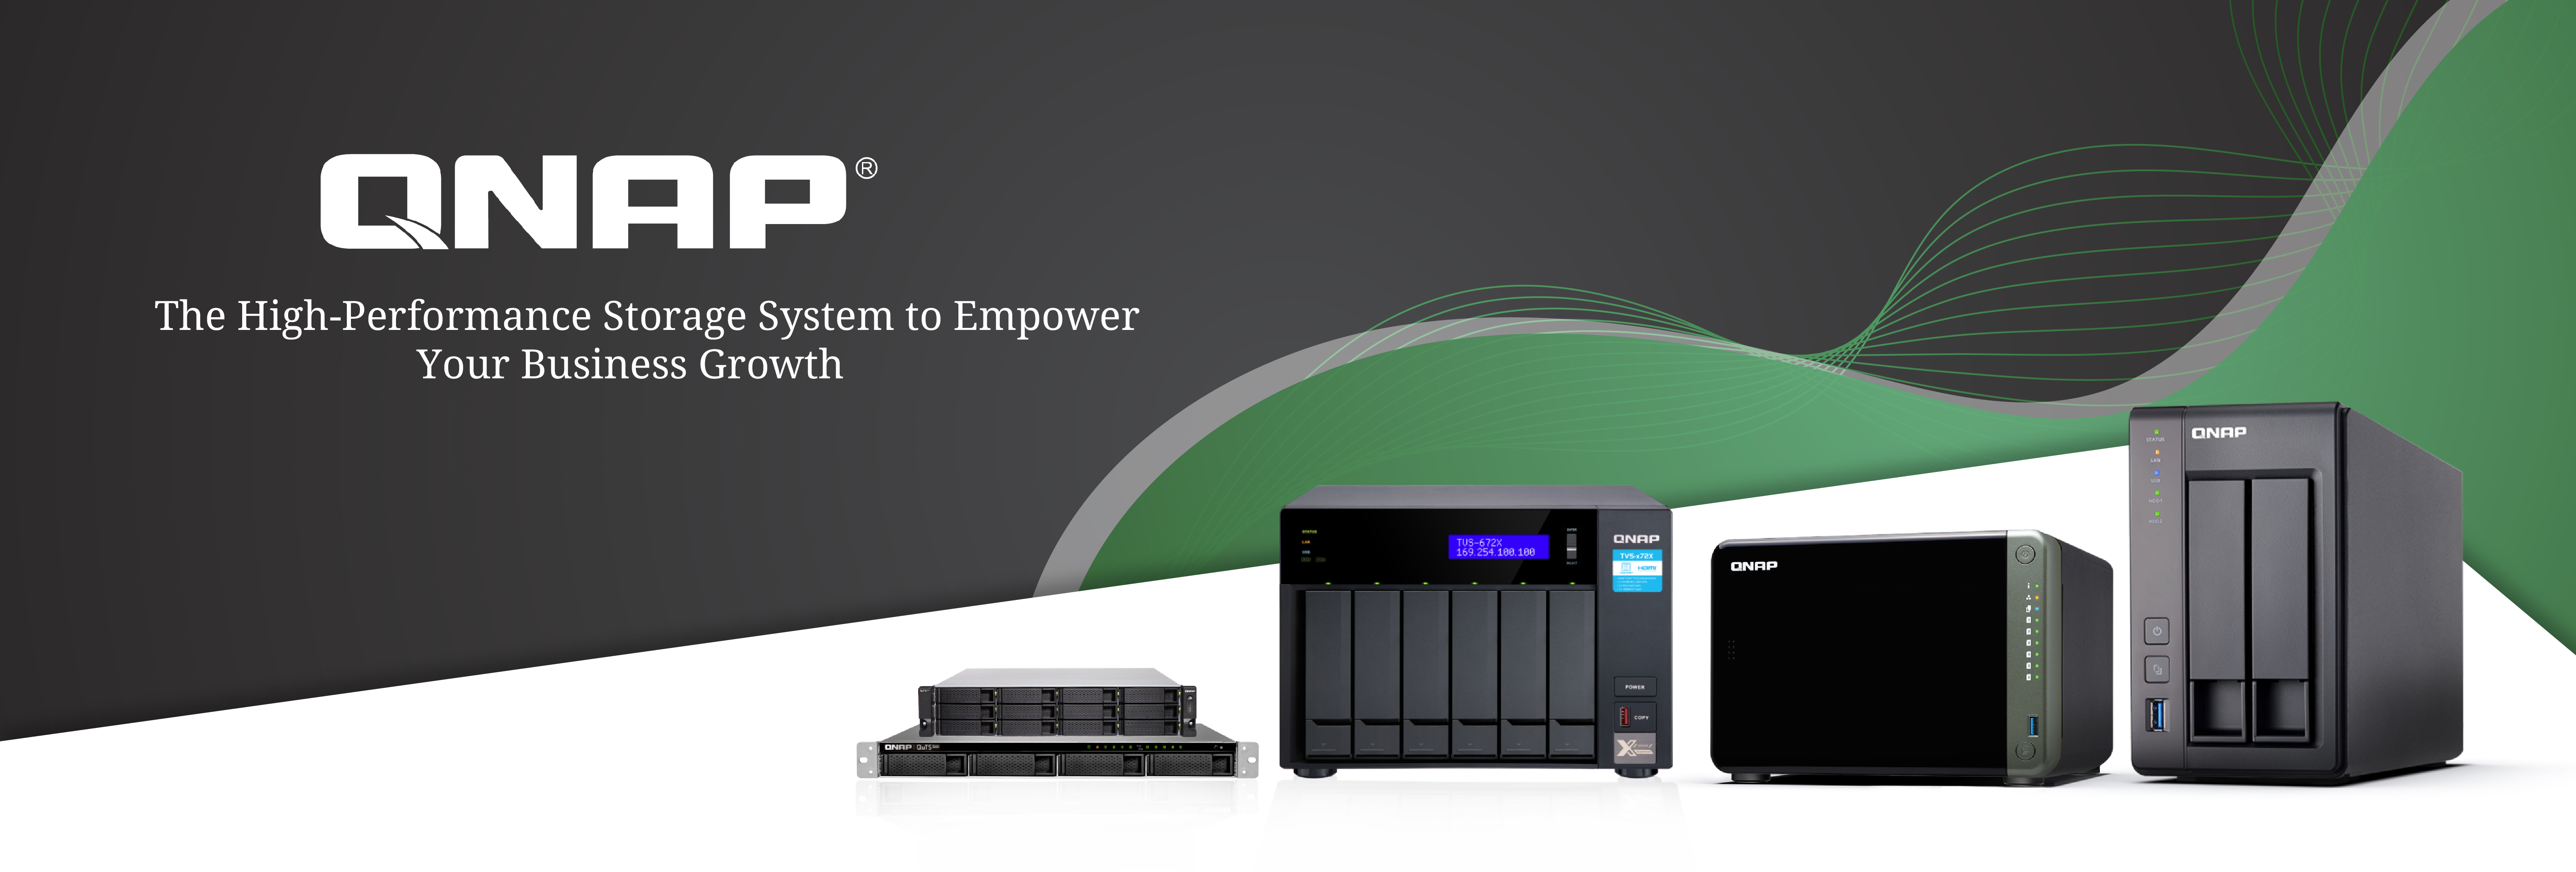 Infome technologies:The High-Performance Storage System to Empower Your Business Growth